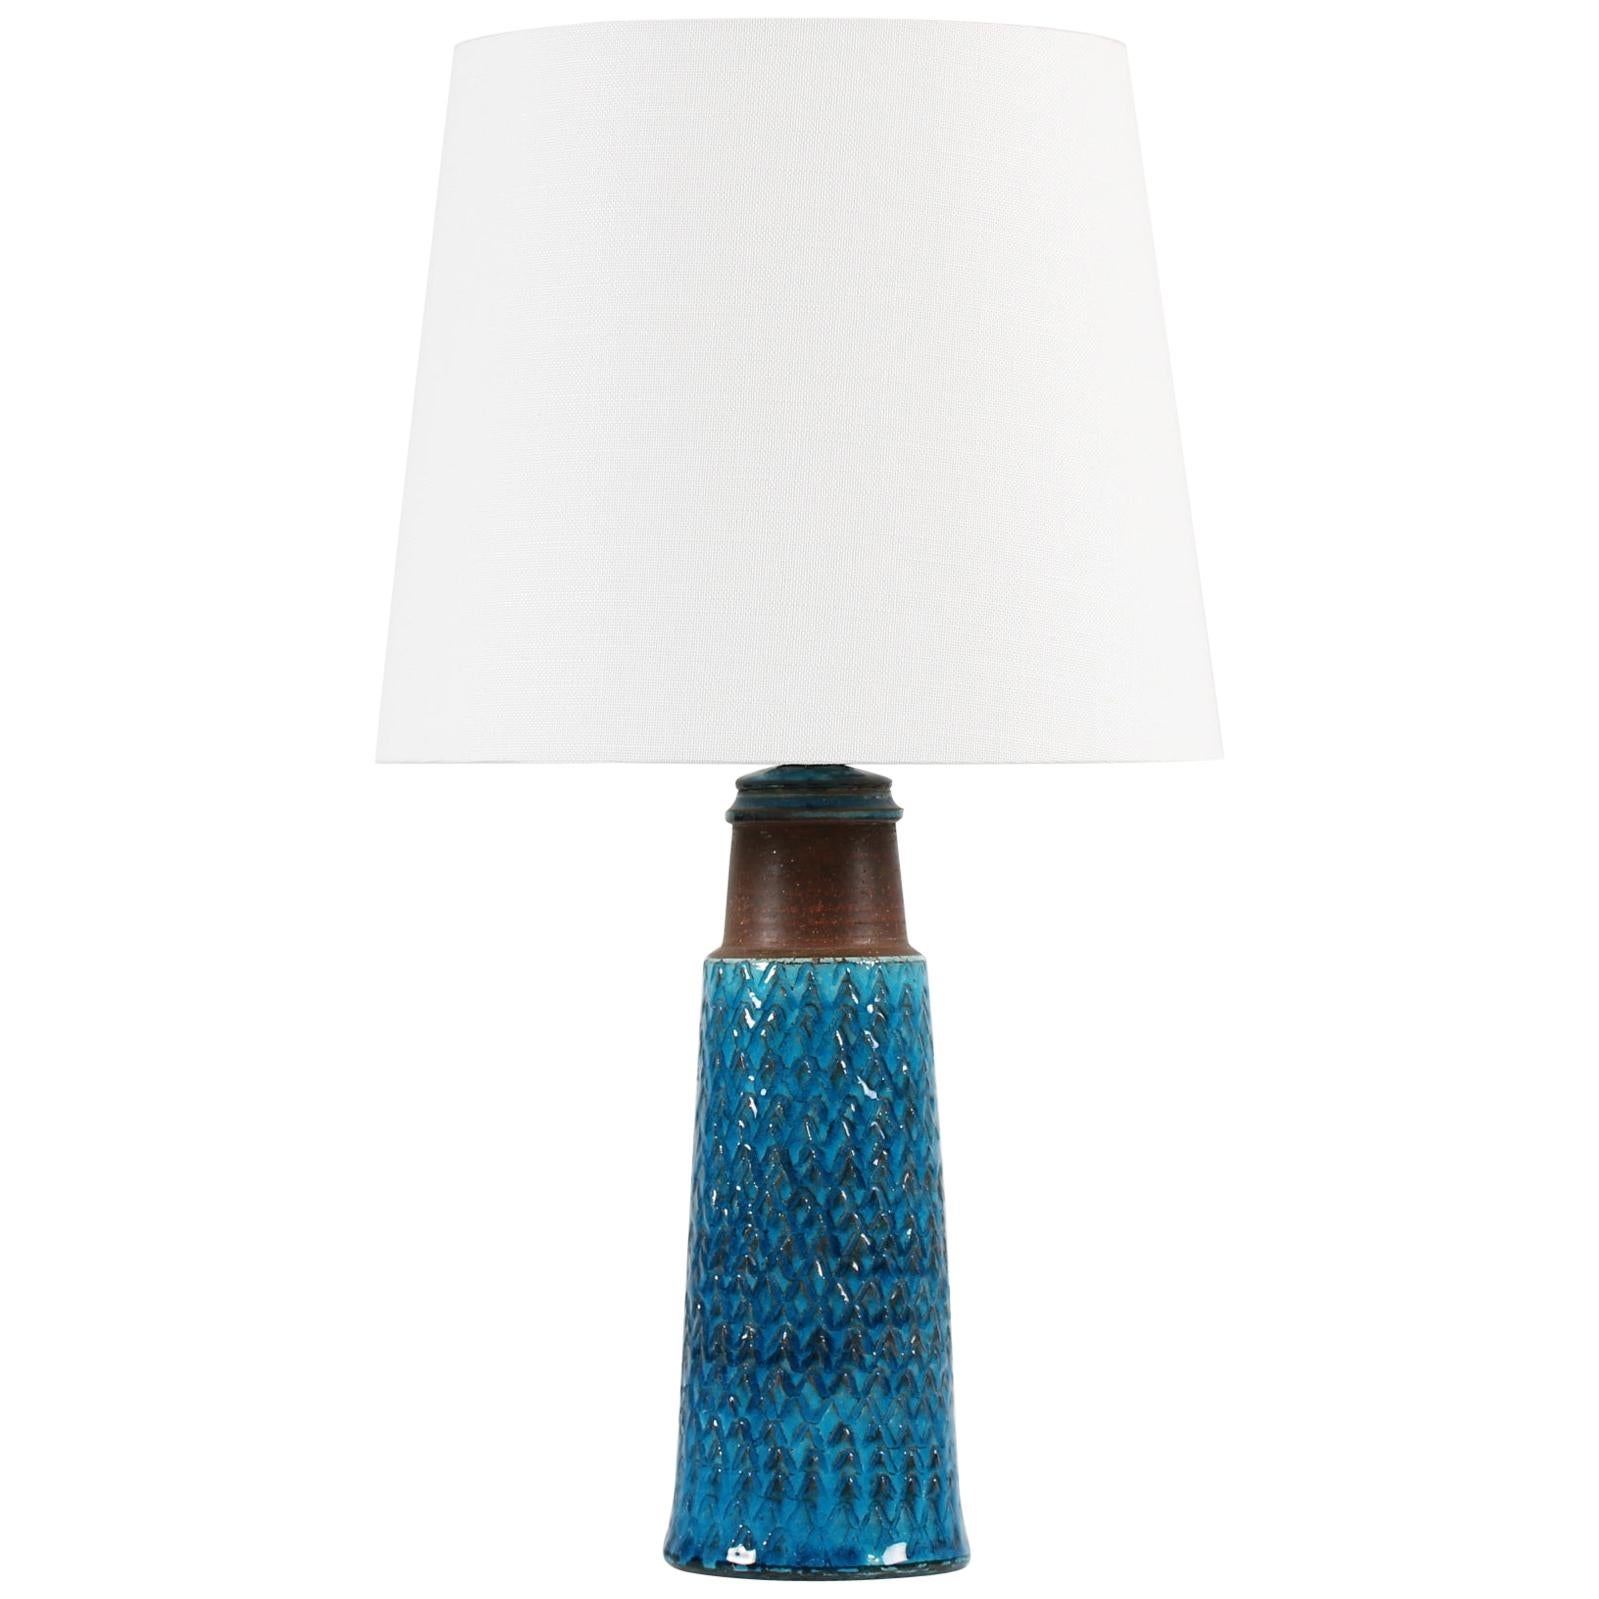 Herman A Kähler Small Table Lamp with Turquoise Glaze Made in Denmark Midcentury